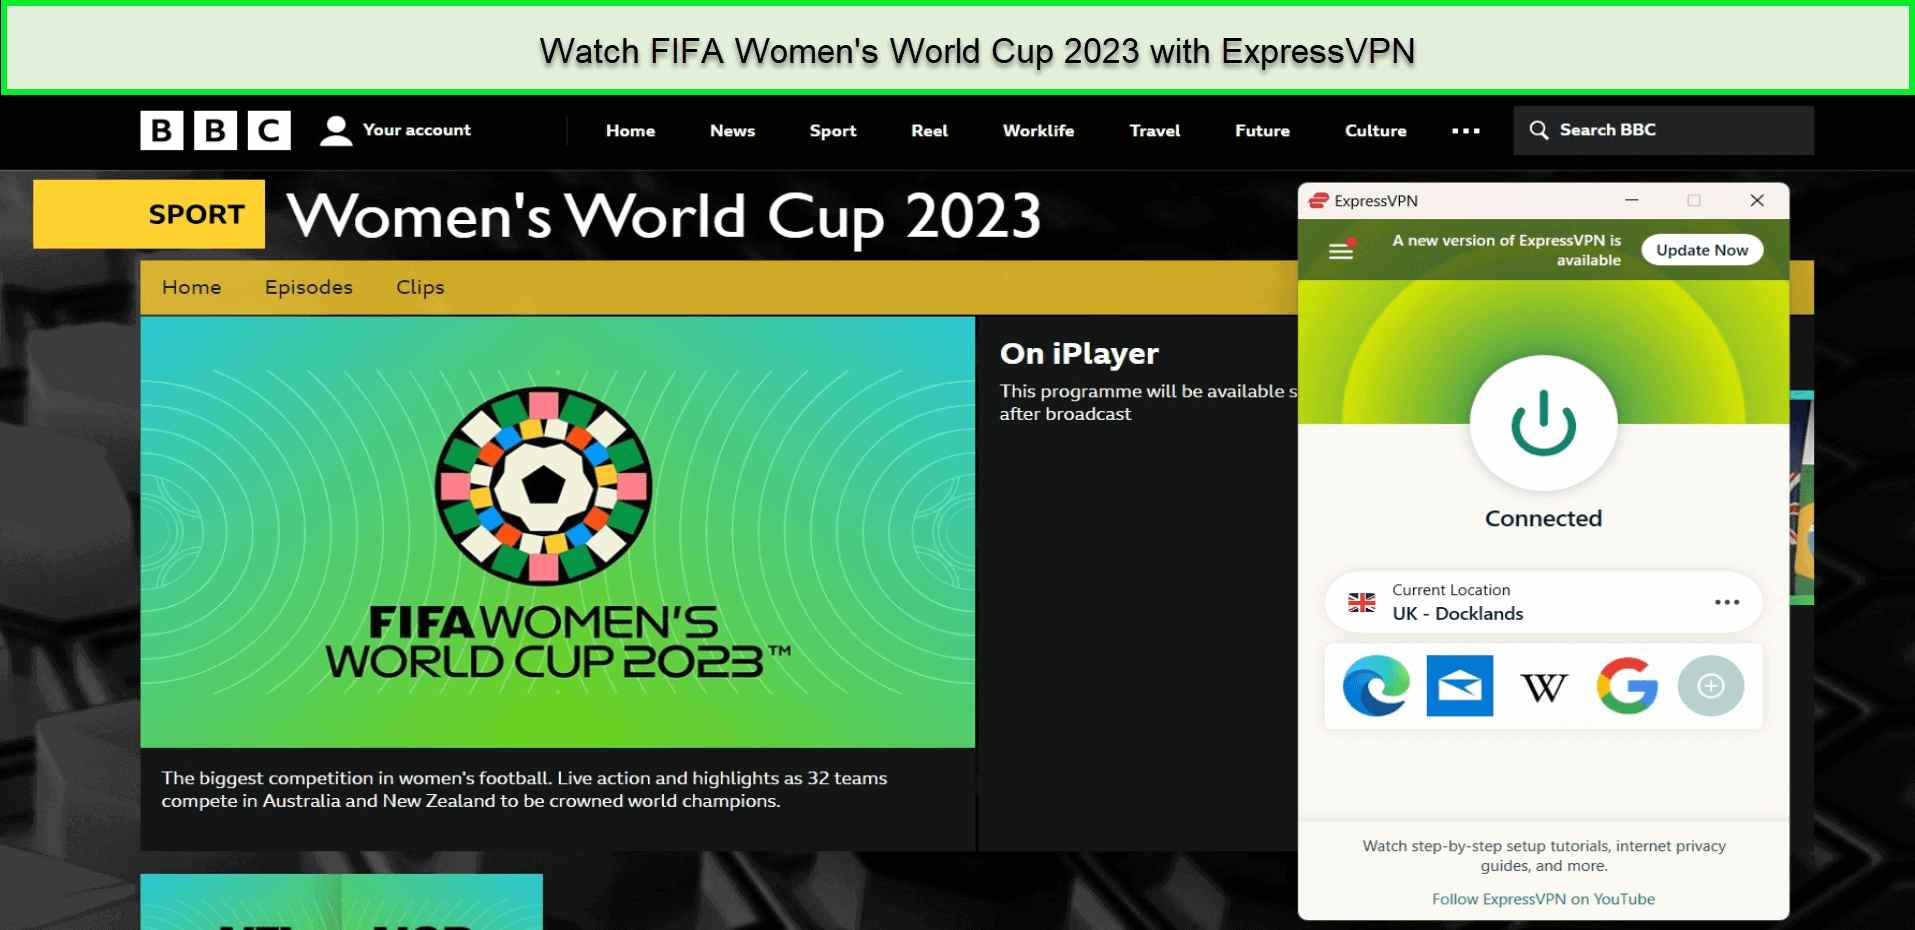 Unblock and Watch-FIFA-Womens-World-Cup-2023-outside-UK-on-BBC-iPlayer-with-ExpressVPN